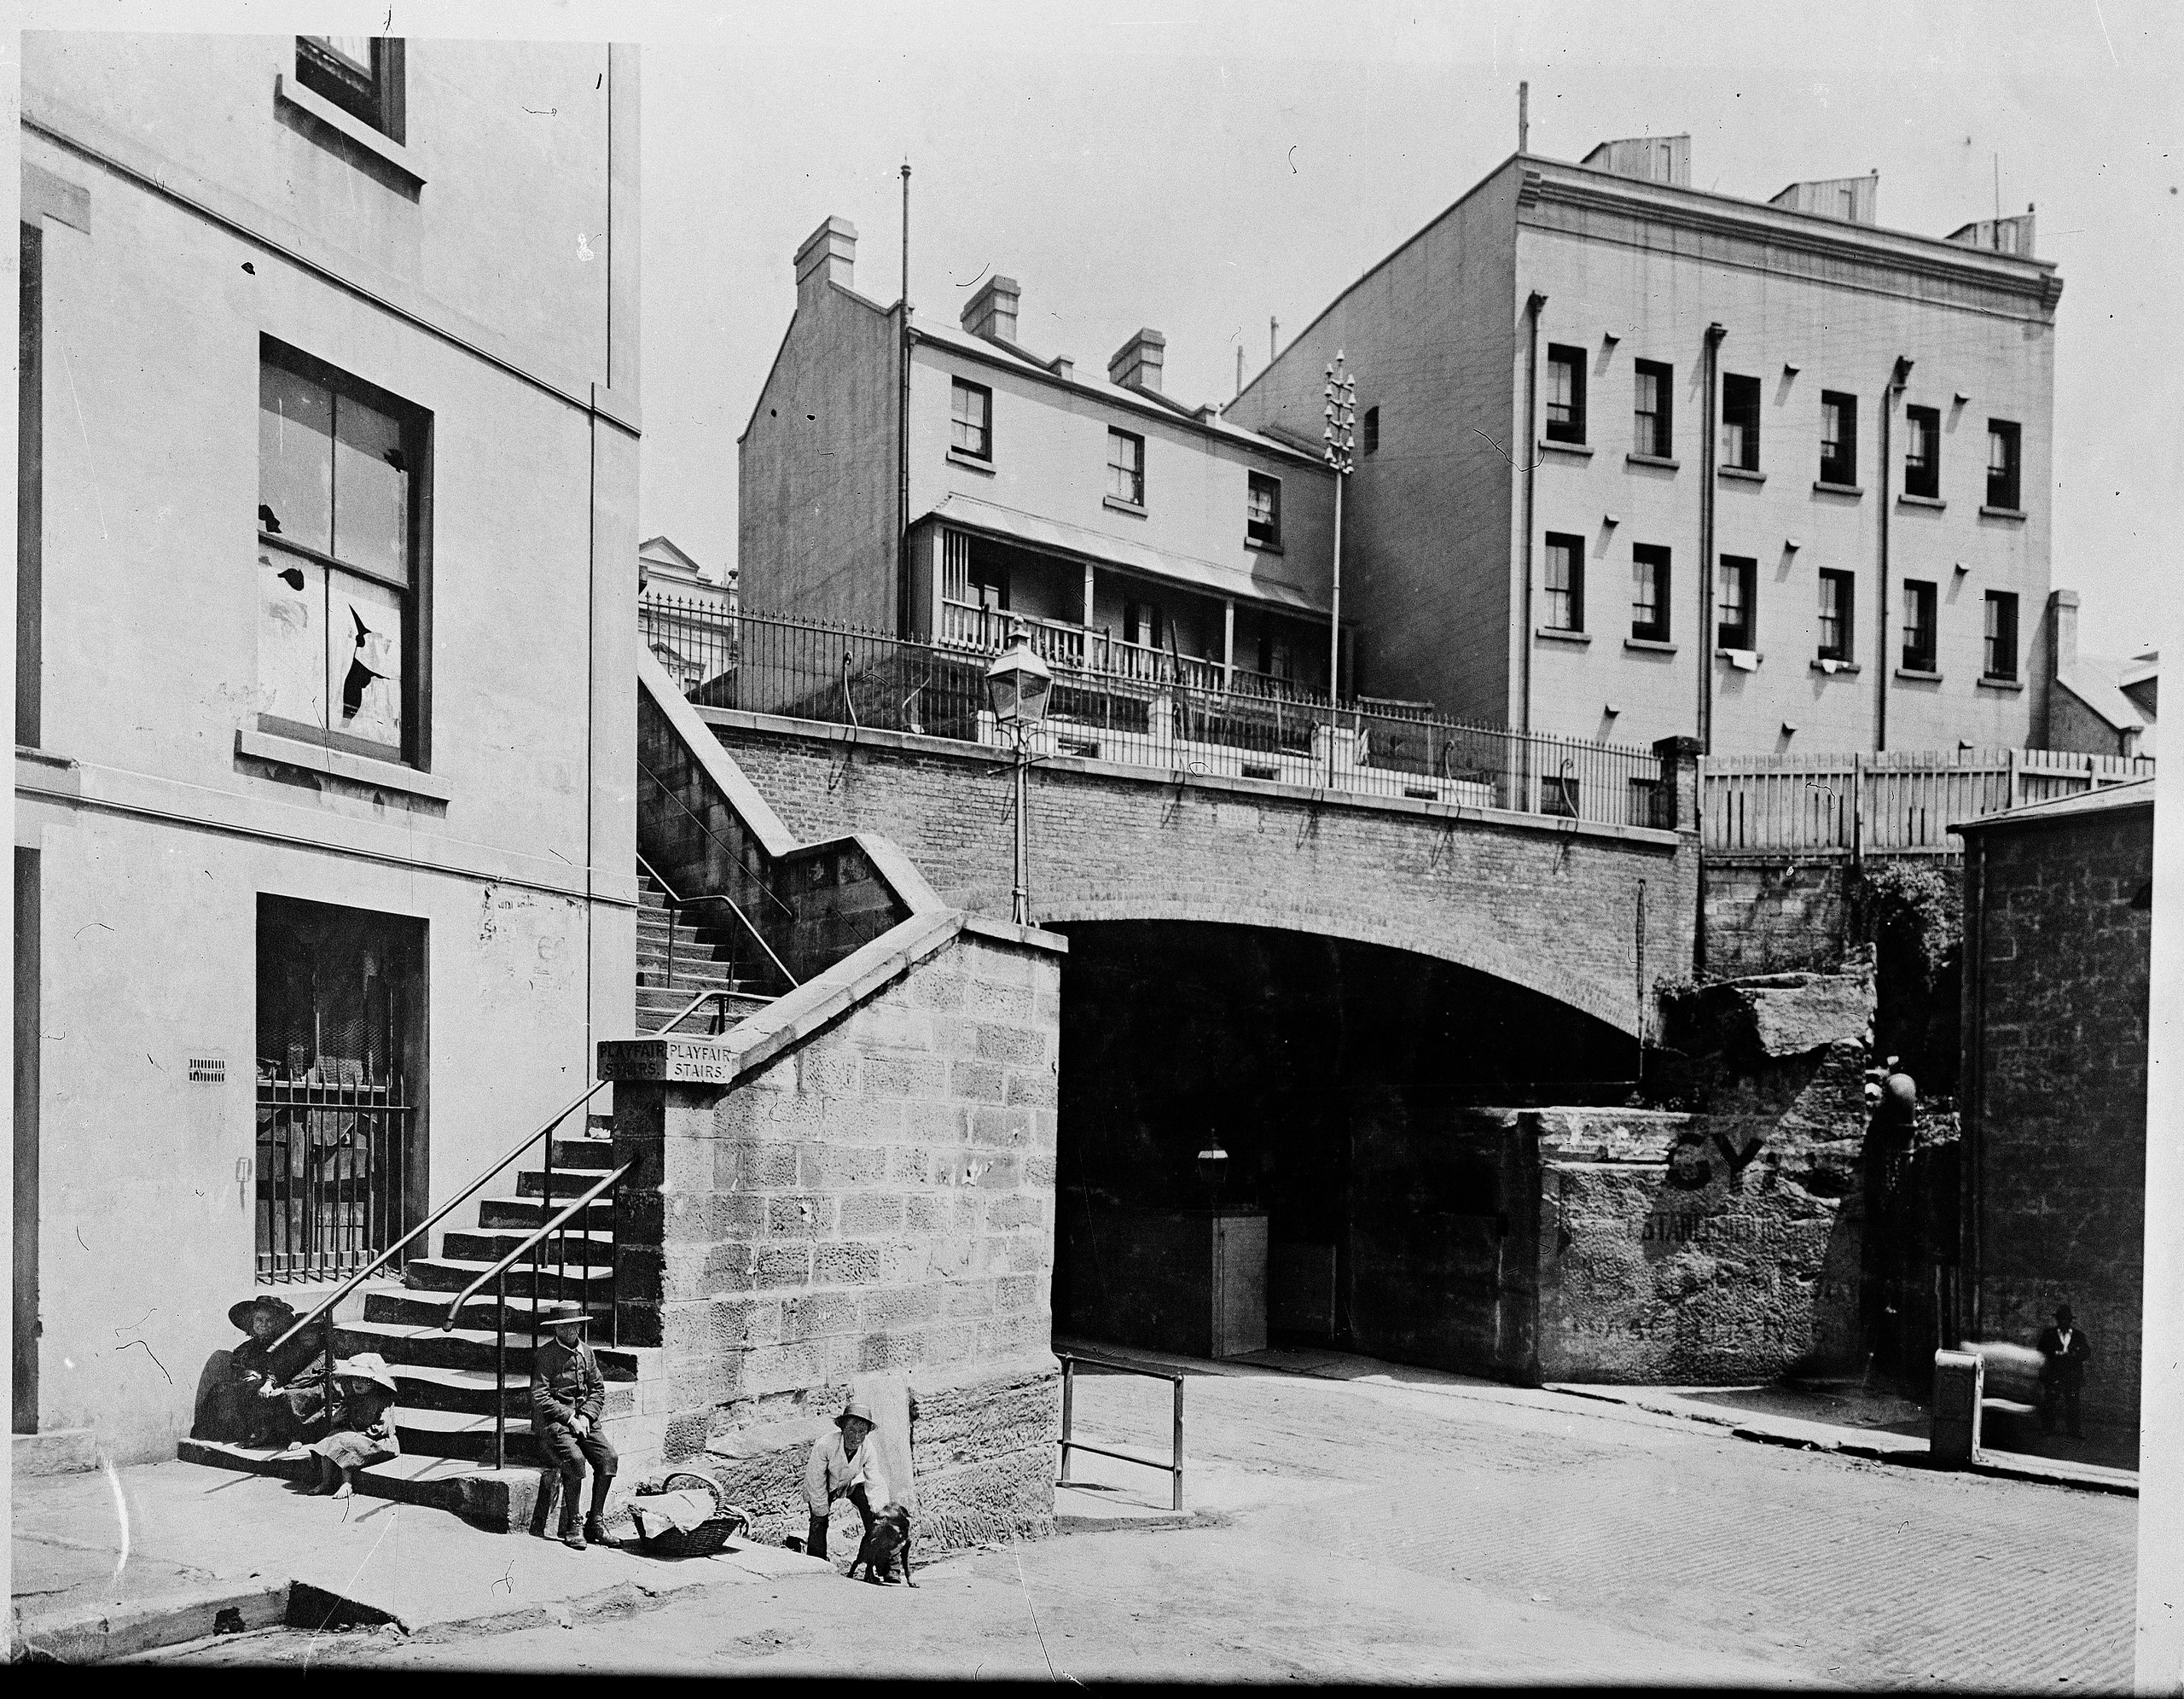 'Windmill Street'and'Sitting on the Playfair stairs' from the Tyrrell Collection